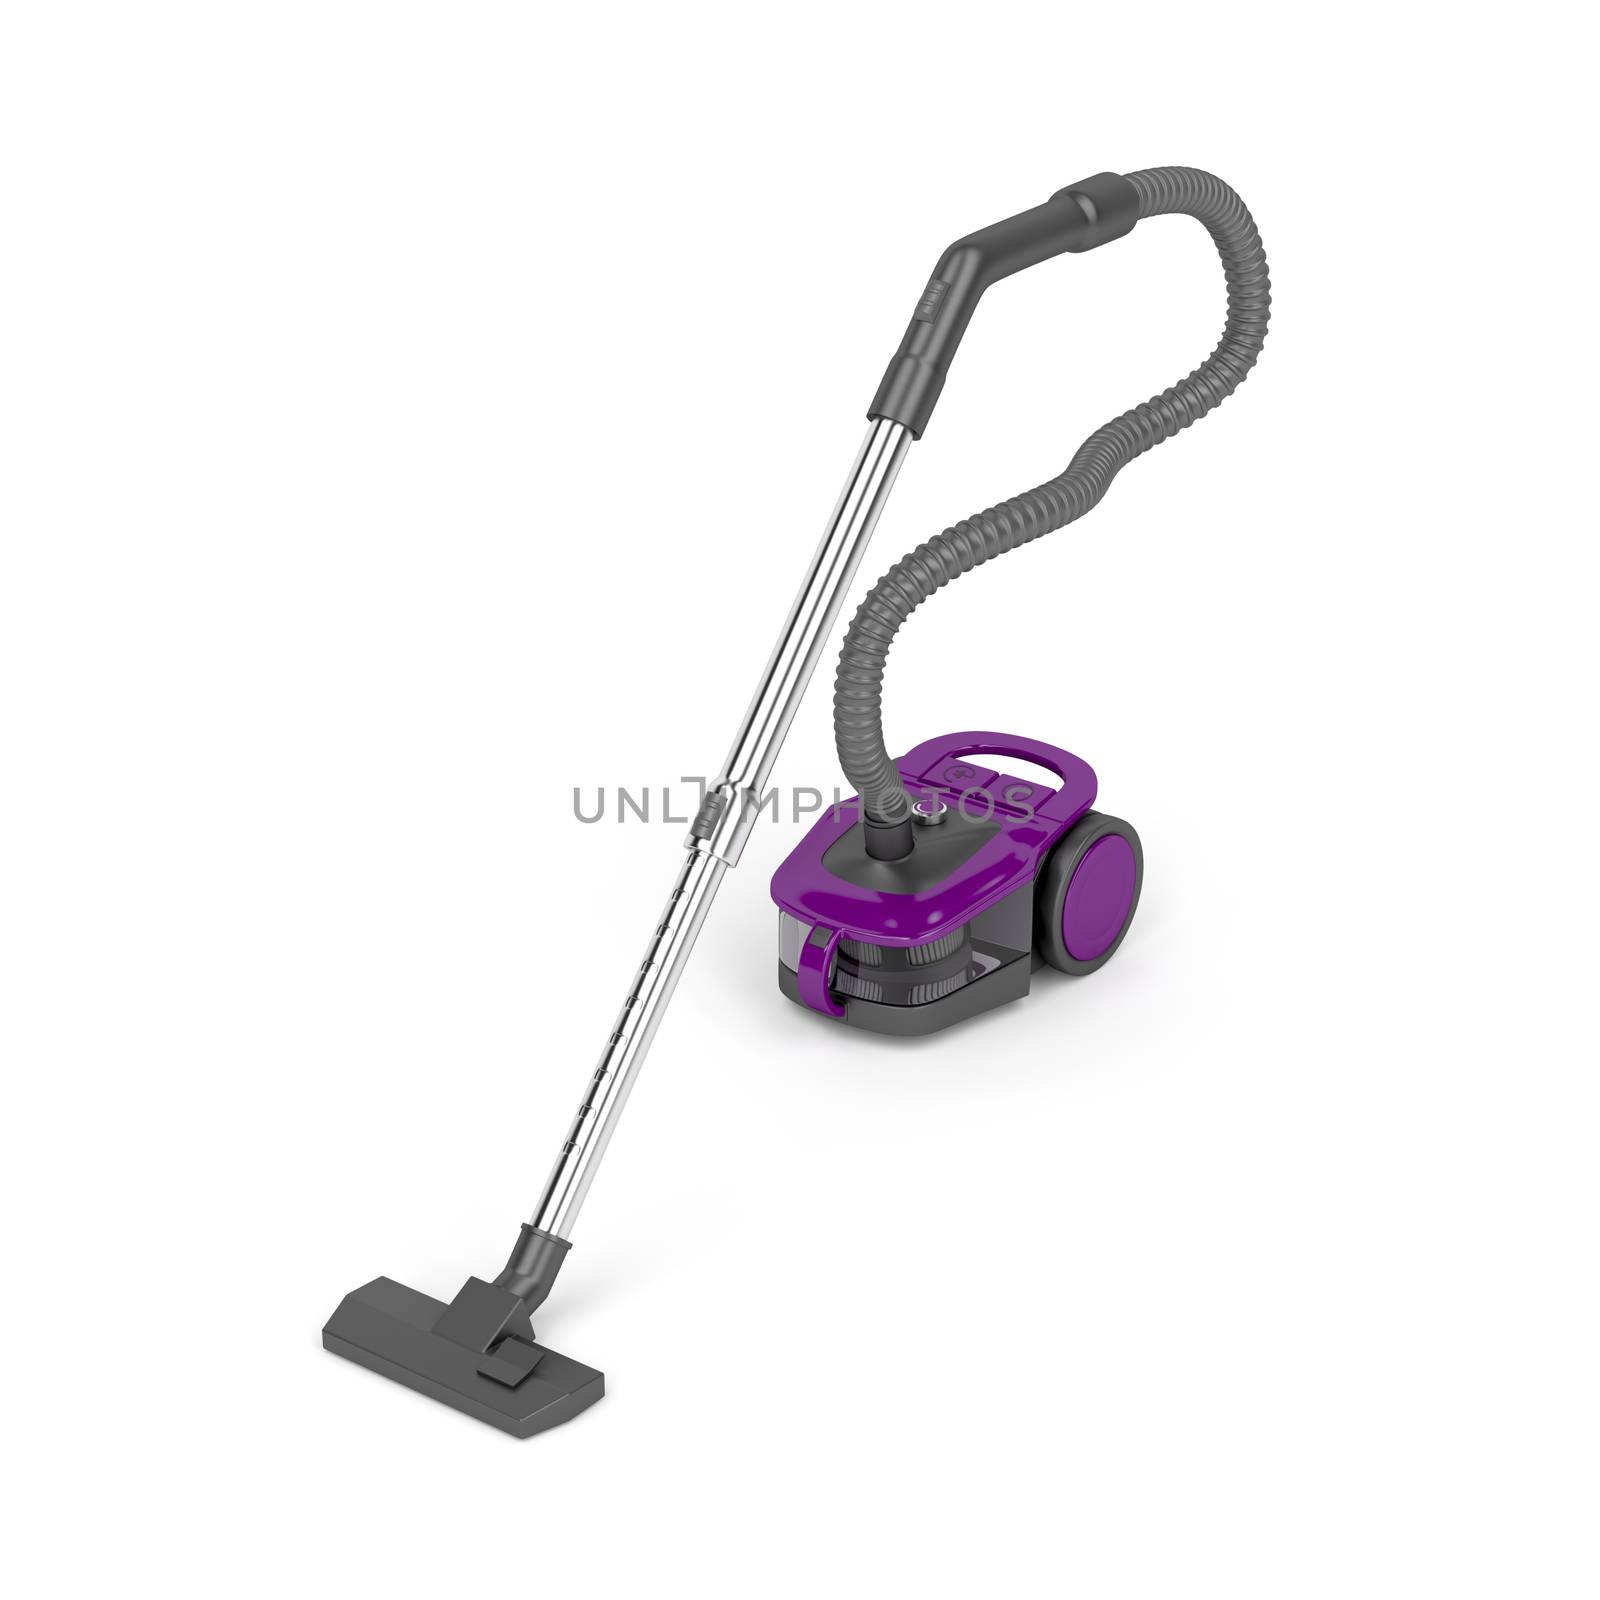 Vacuum cleaner by magraphics